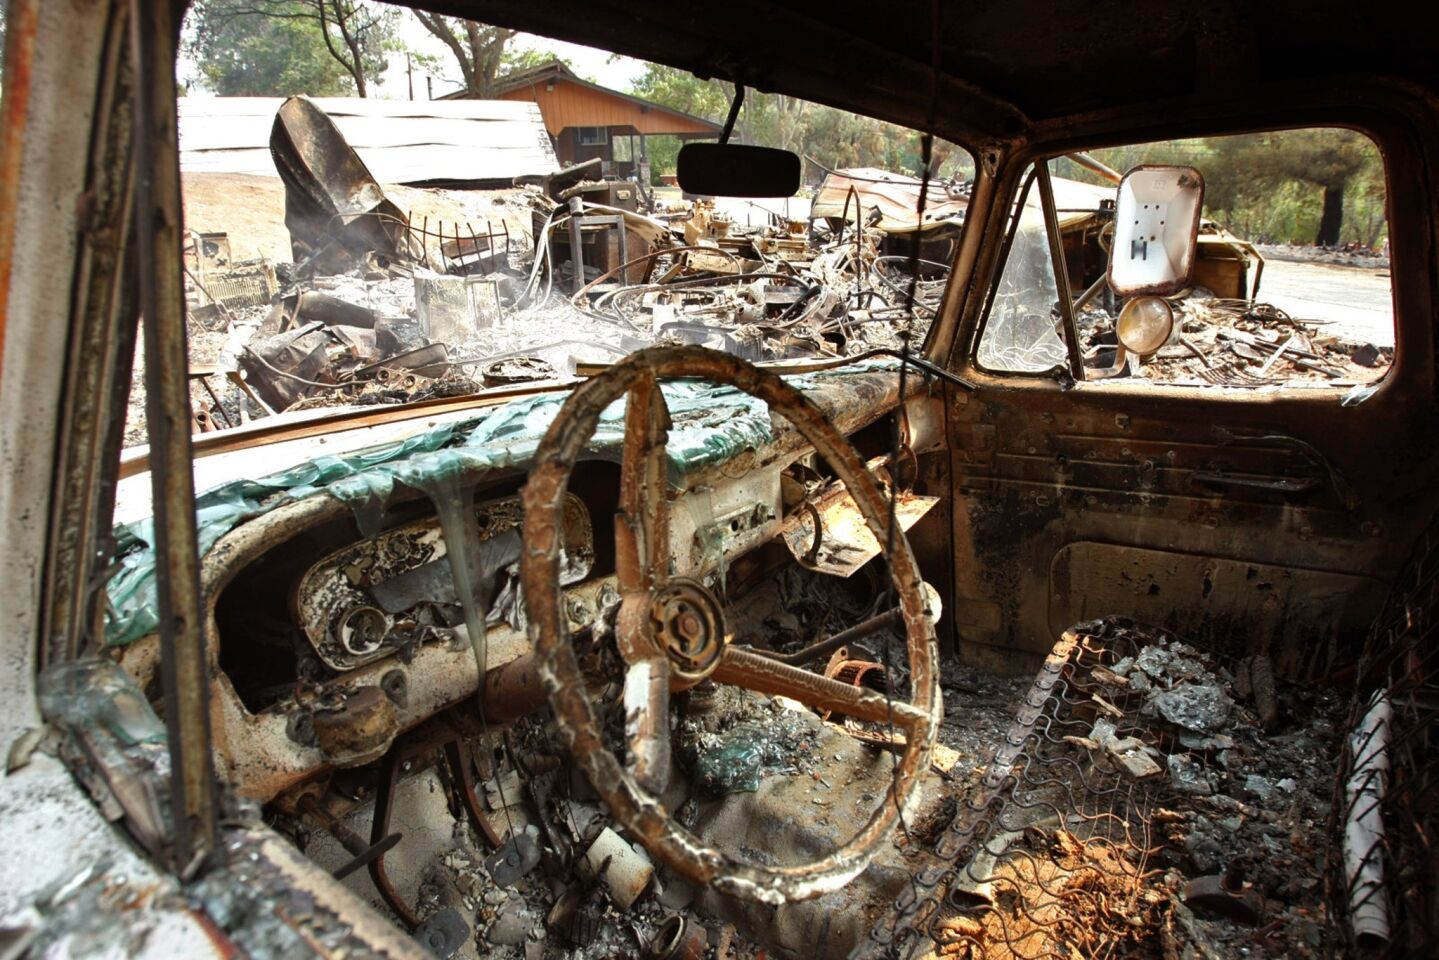 The charred interior of a truck can be seen, along with a storage structure that was burned to the ground by the Powerhouse fire in Lake Hughes.